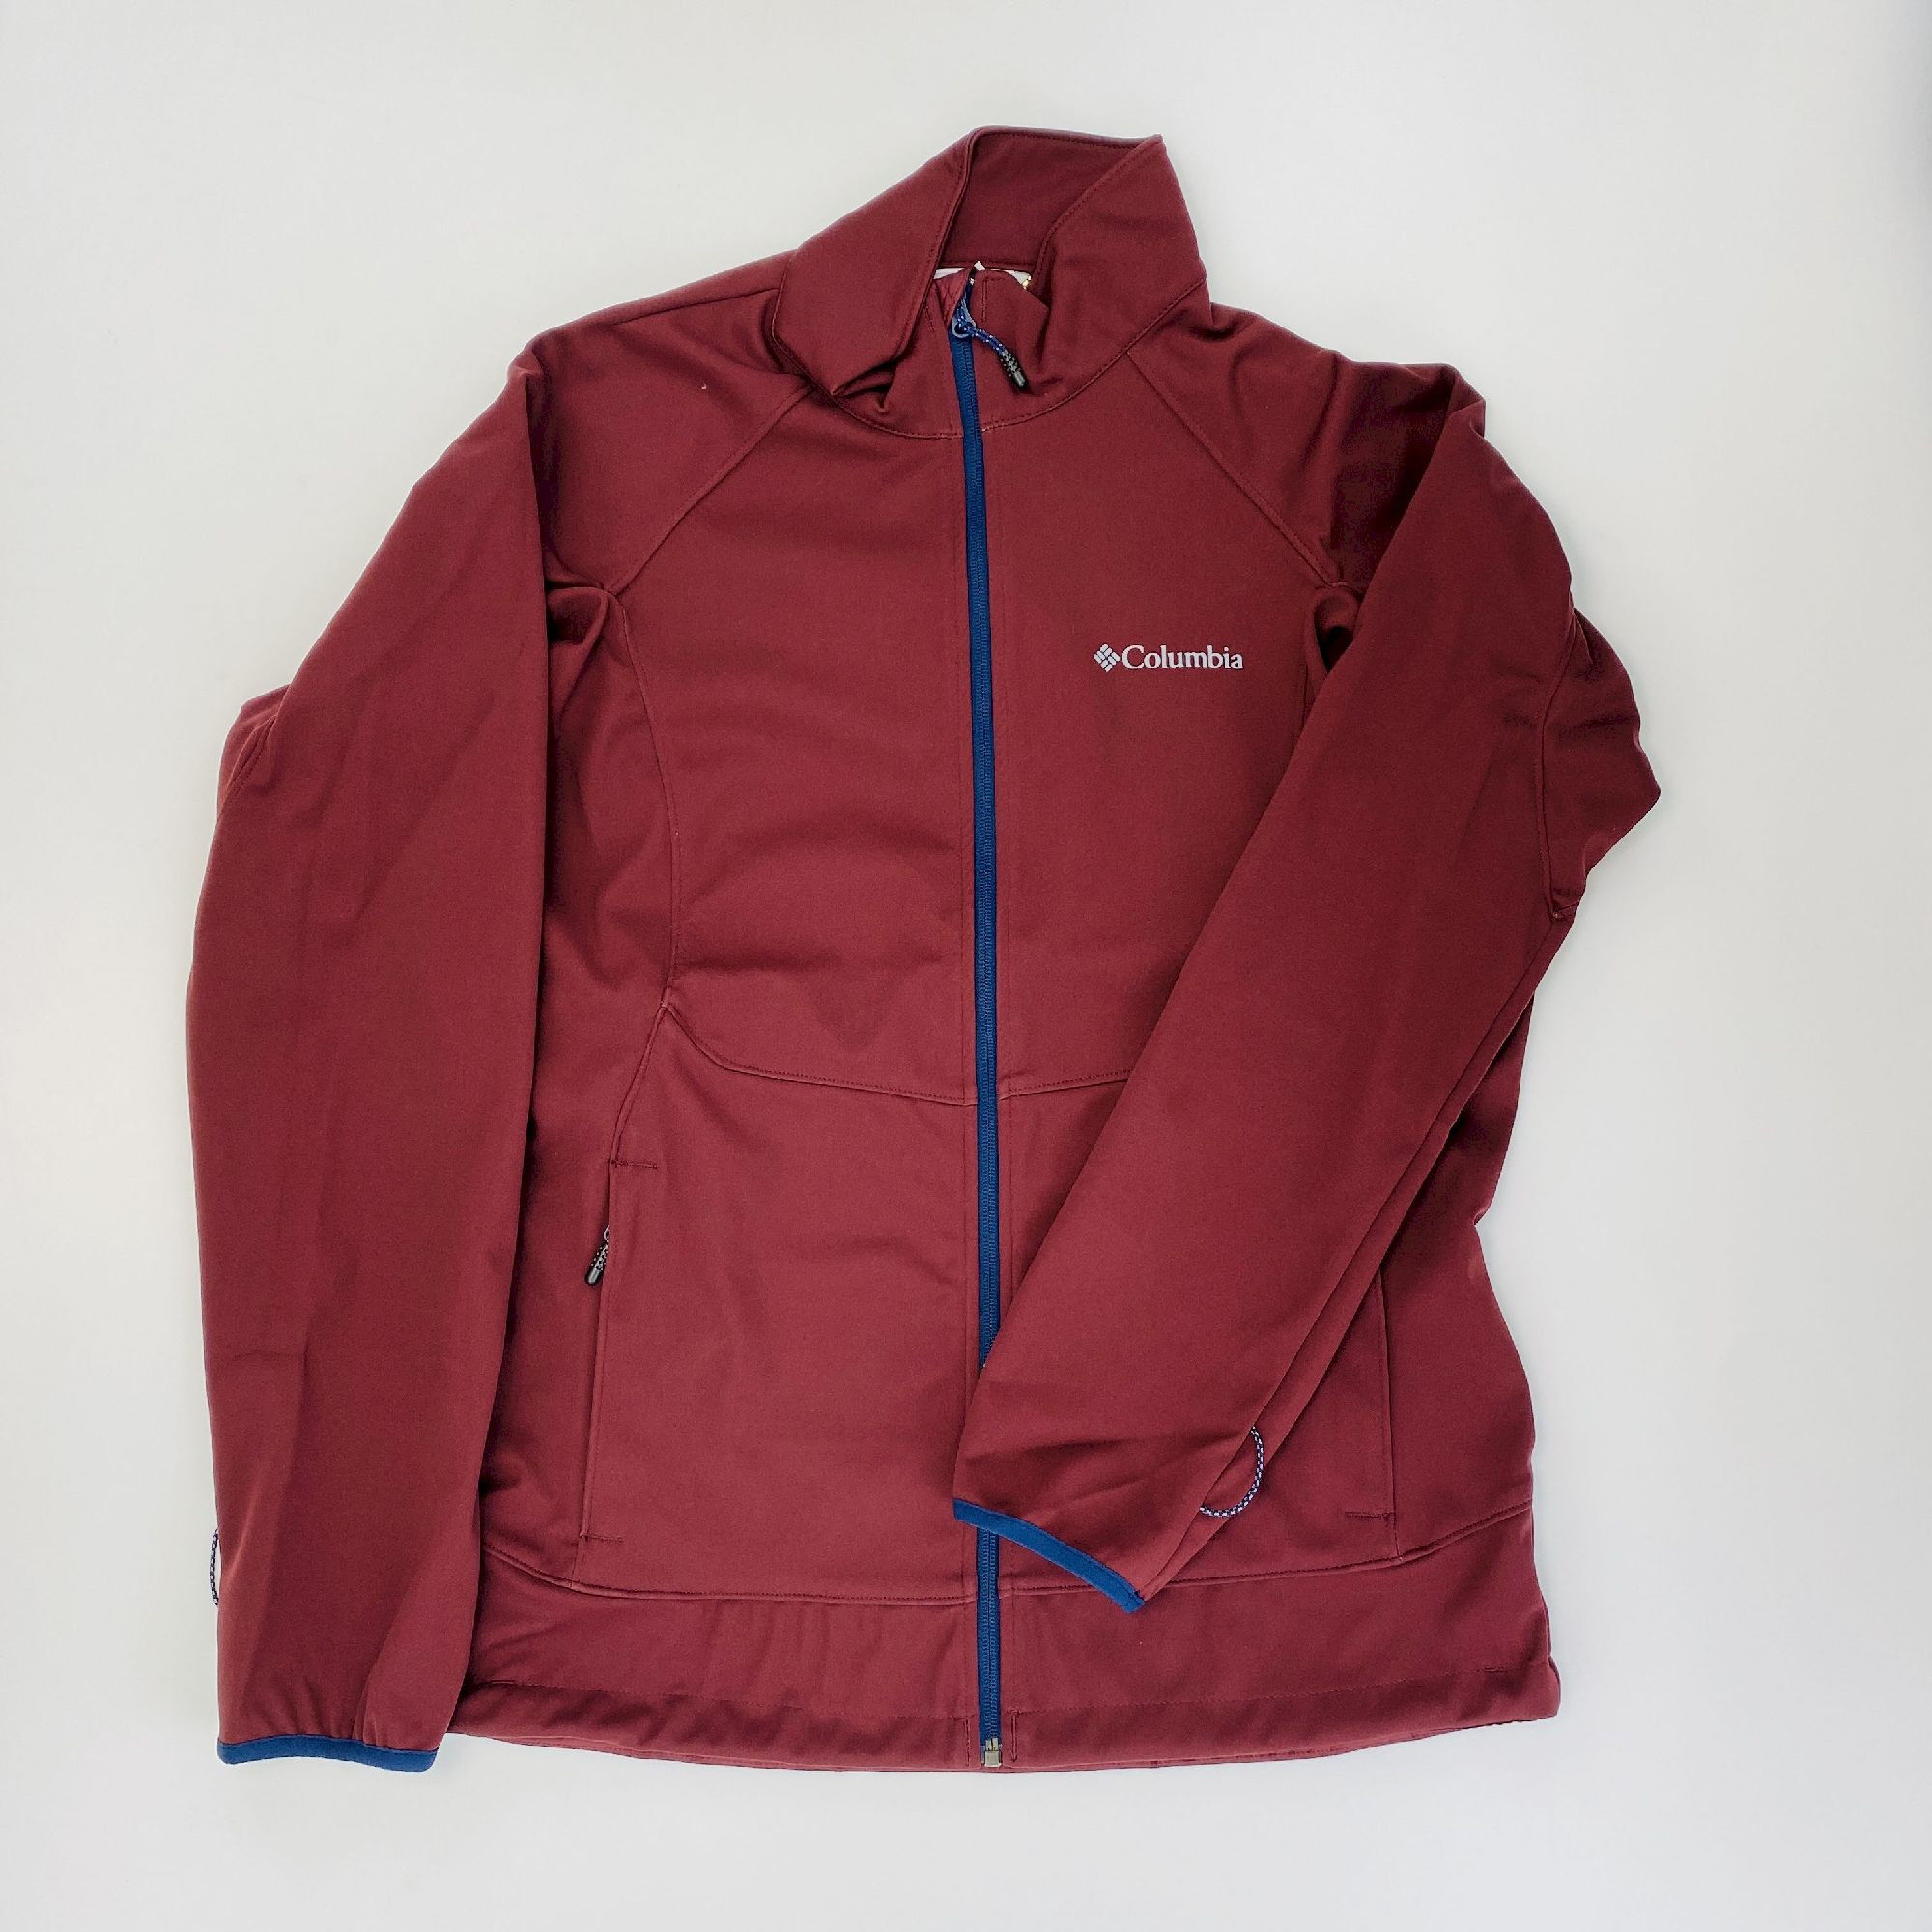 Columbia Canyon Meadows™ Softshell Jacket - Seconde main Veste softshell homme - Rouge - M | Hardloop